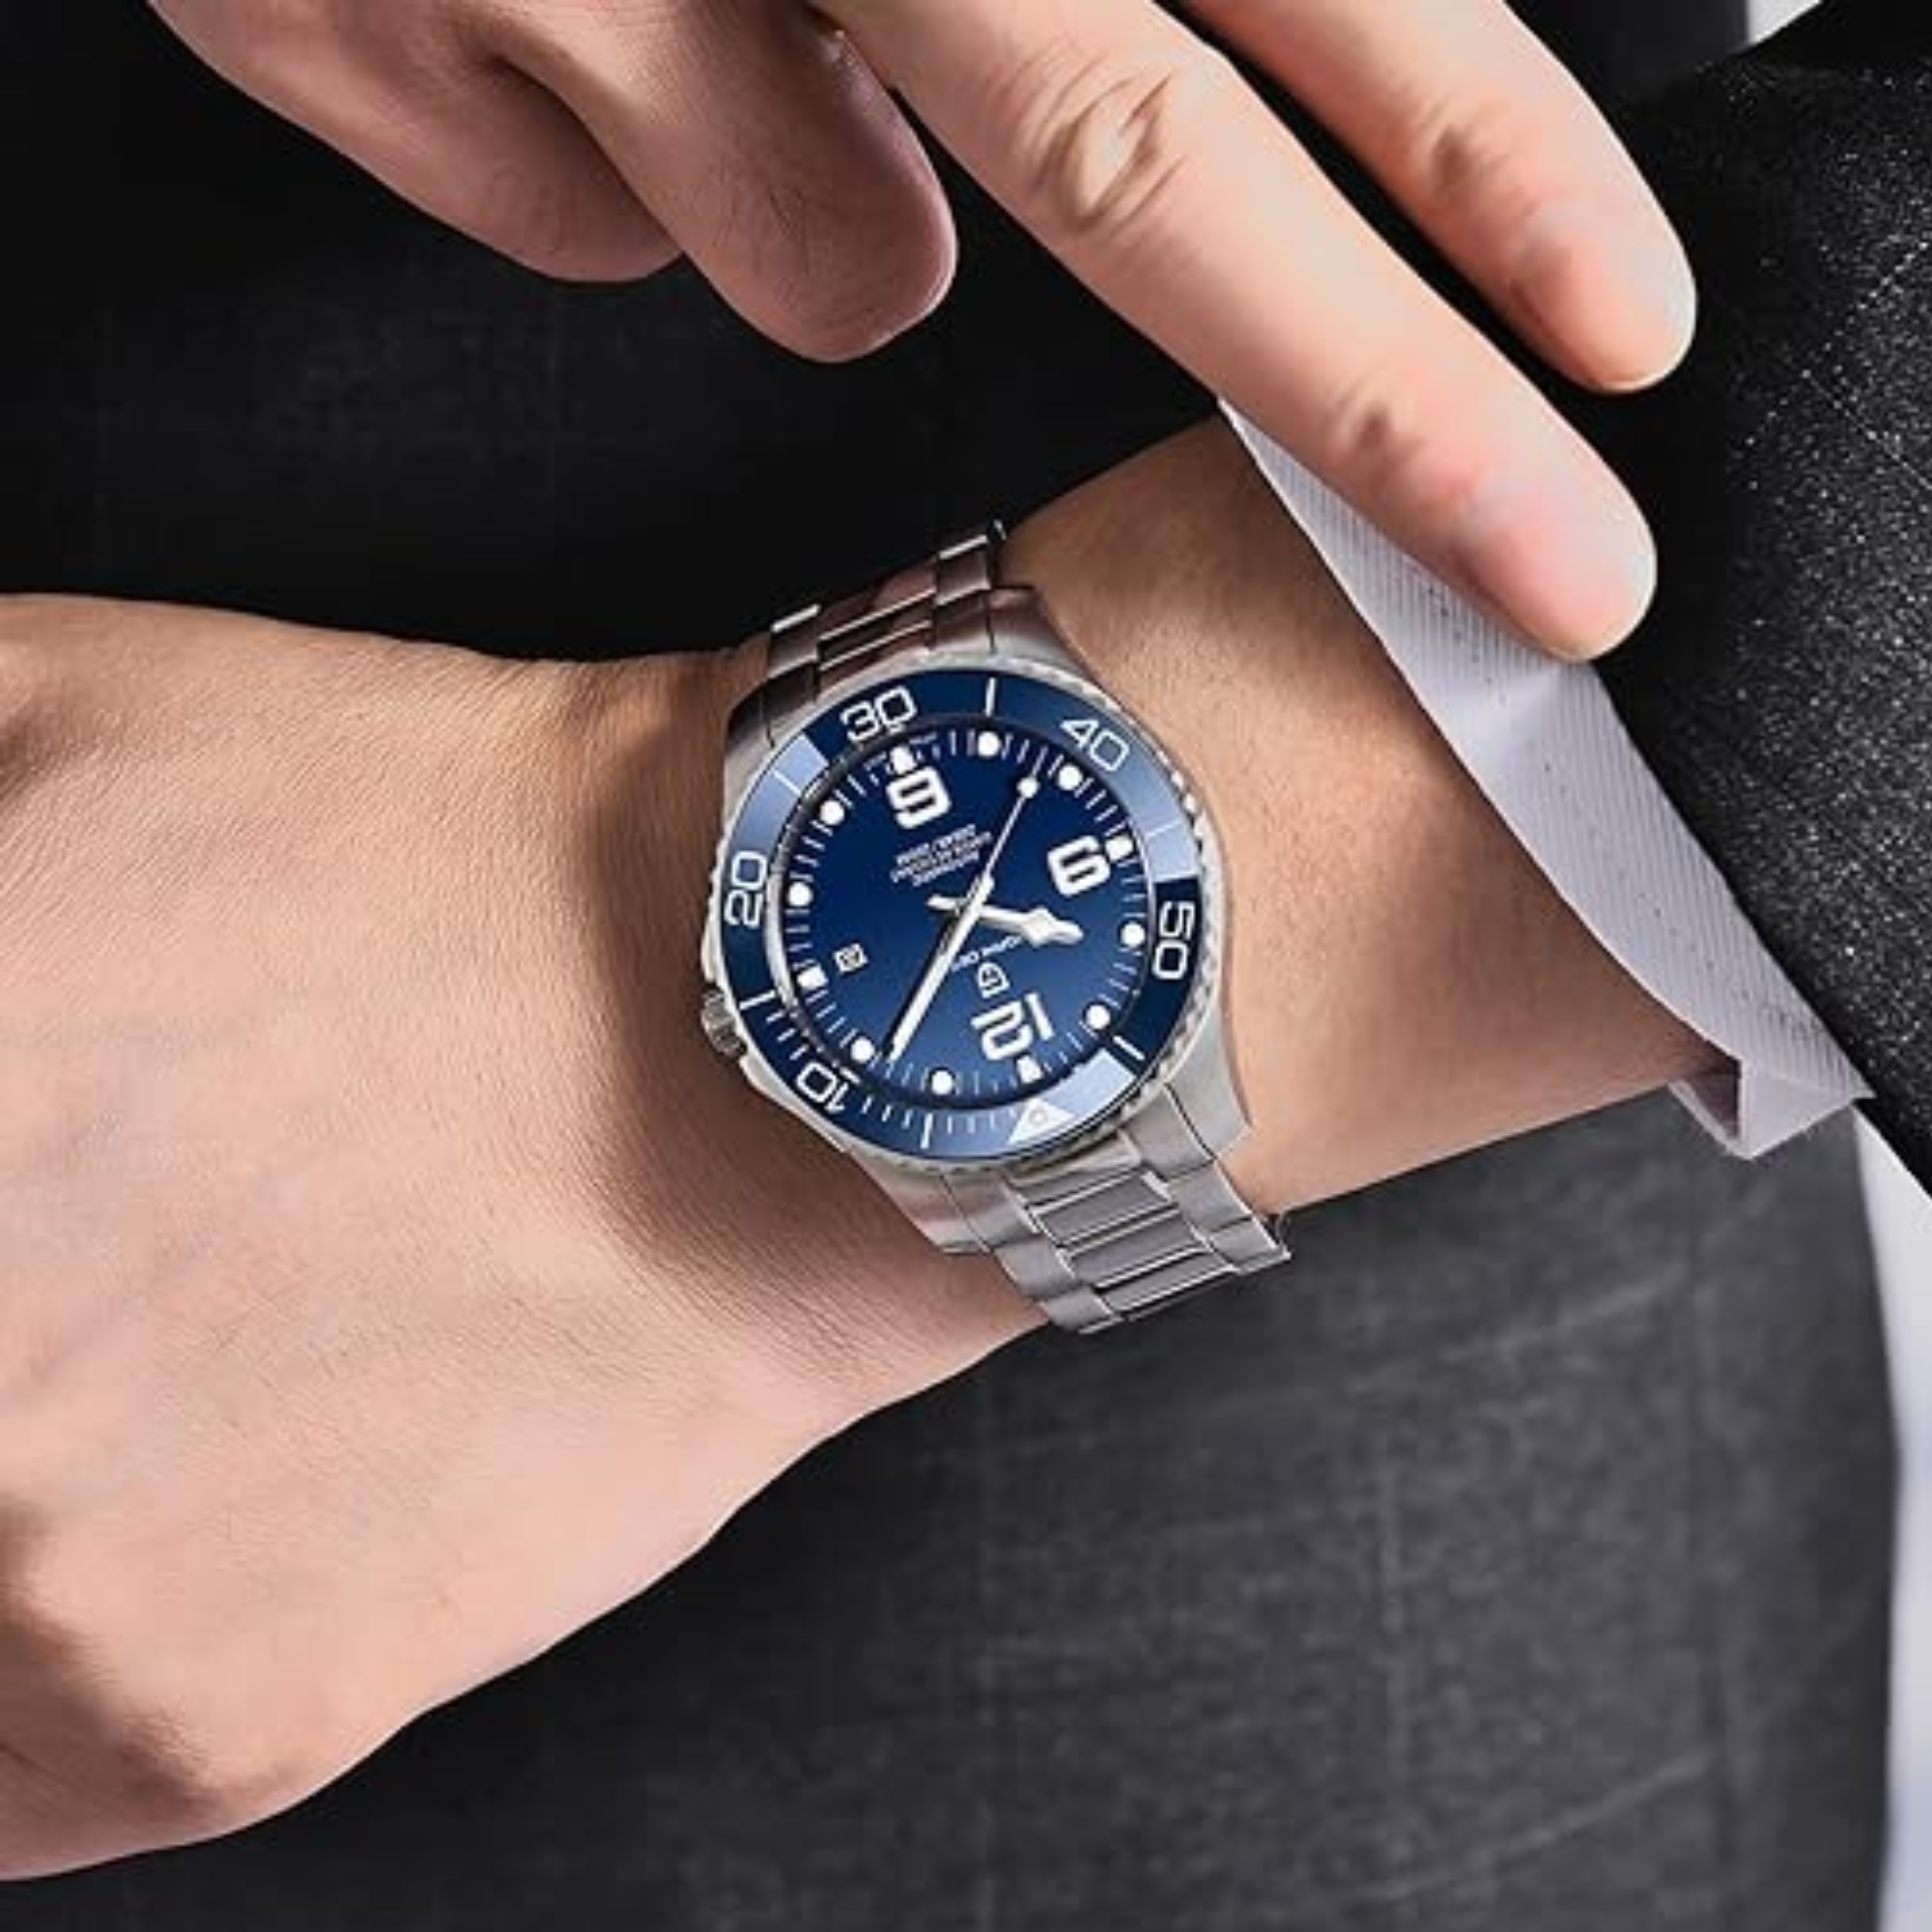 Pagani Design Men's Analogue Japanese Automatic Self-Wind Mechanical Watch with Stainless Steel Bracelet PD1702 - Blue Dial